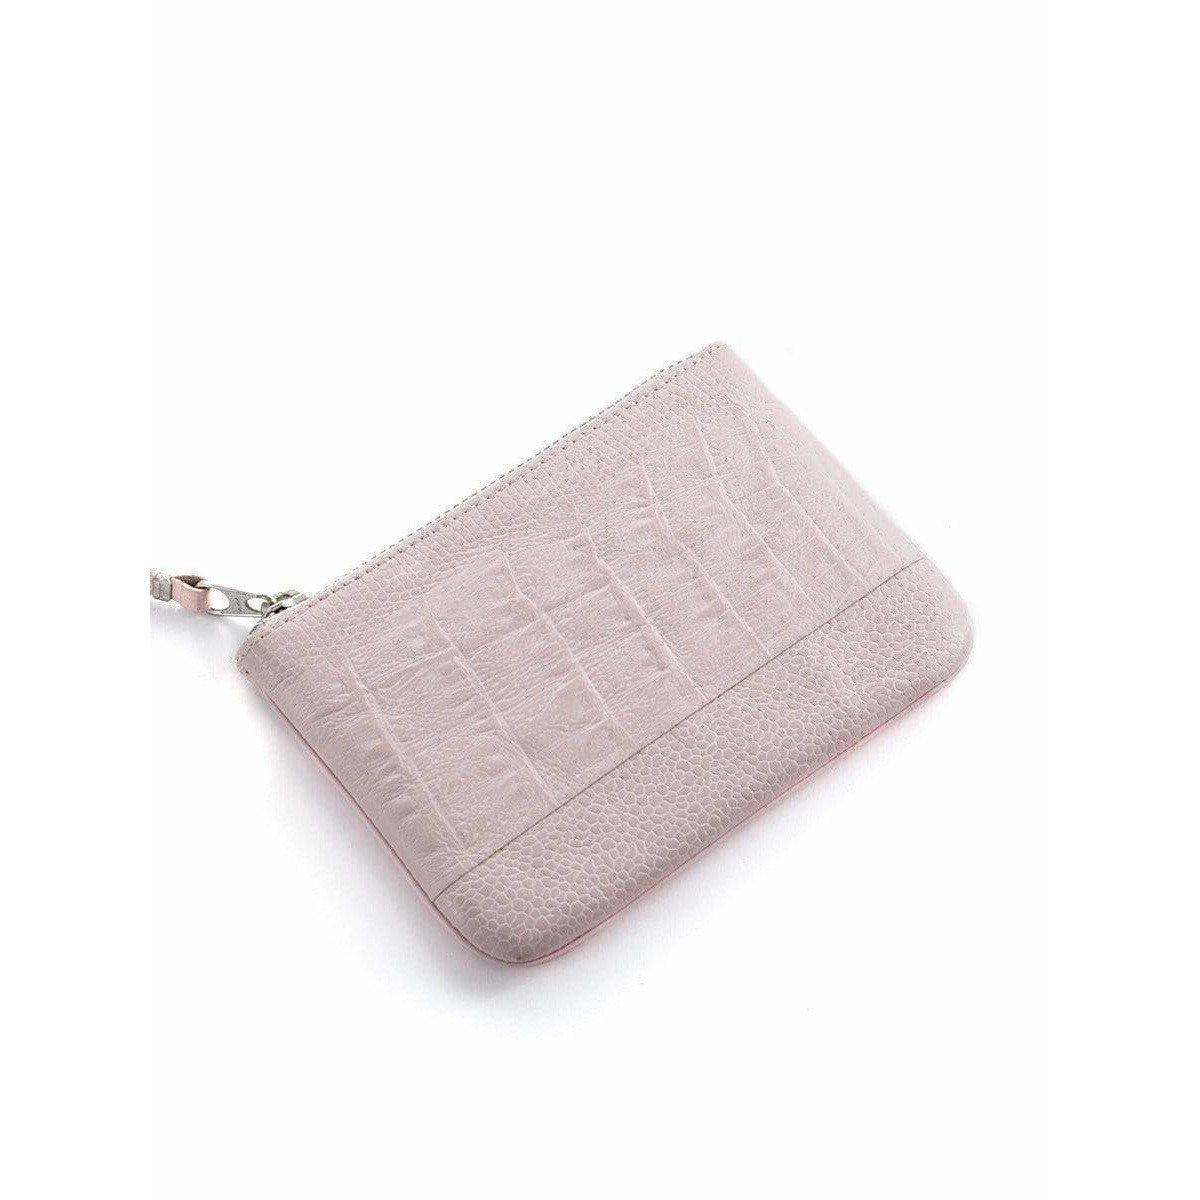 Pink crocodile-effect embossed leather coin purse with zipper closure from Comme des Garçons. 